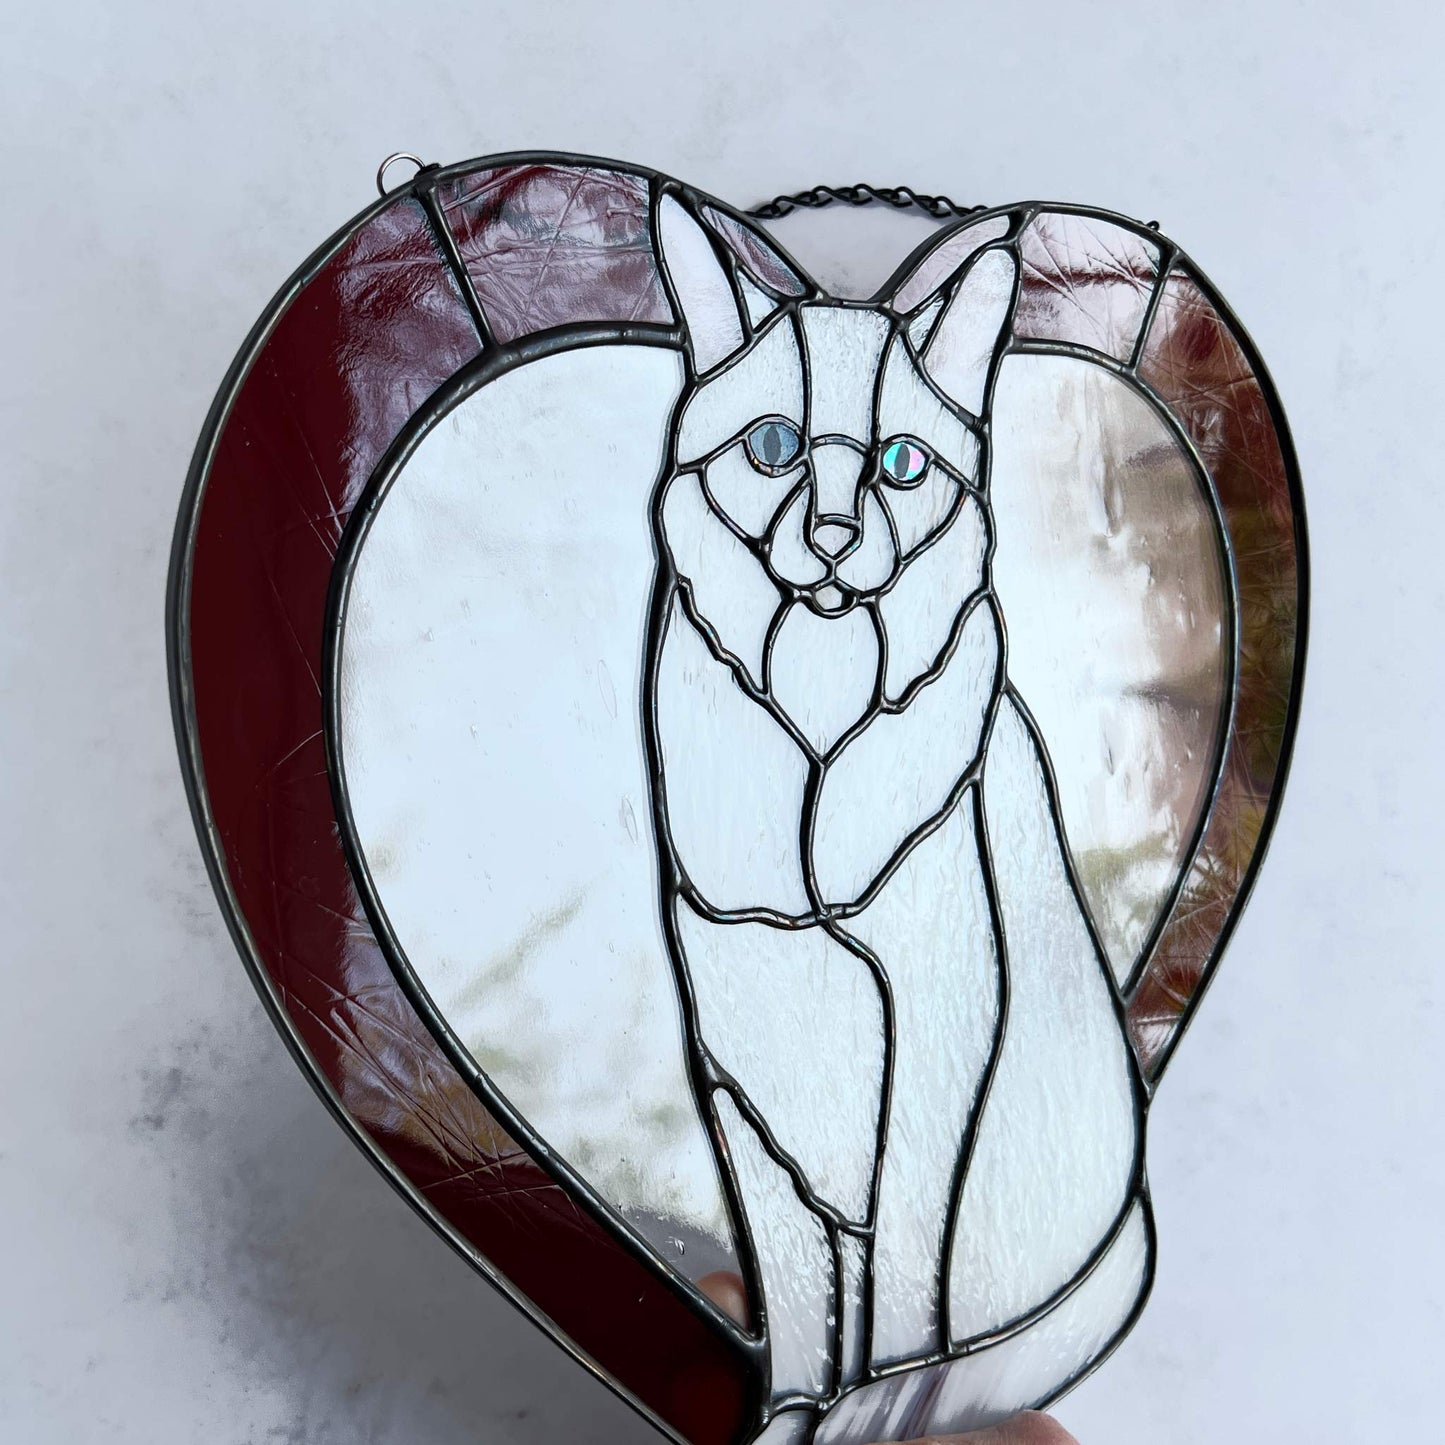 An all white stained glass sitting cat surrounded by a red heart. The glass used for the white fur is textured to resemble real fur and the eyes are an iridescent blue.  Light pink is used for the inner ear and the nose. A clear rainy glass is used between the cat and the heart for stability. This picture shows the texture of the red glass and you can see the iridescence of the eye